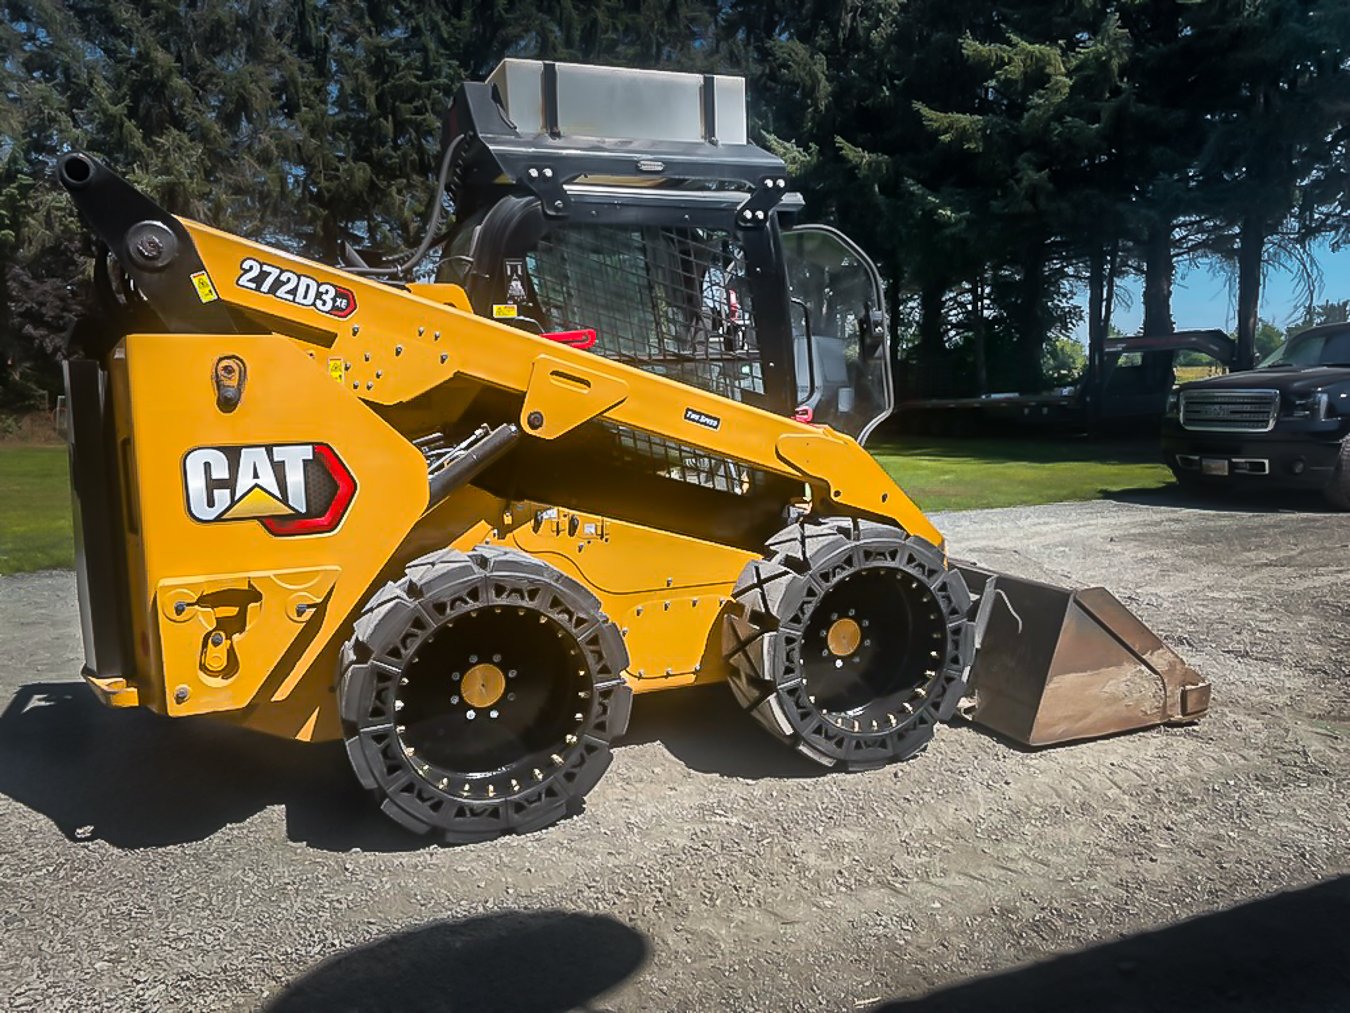 This images shows a CAT 272D3 HS with our 10x16 5 Bobcat tires